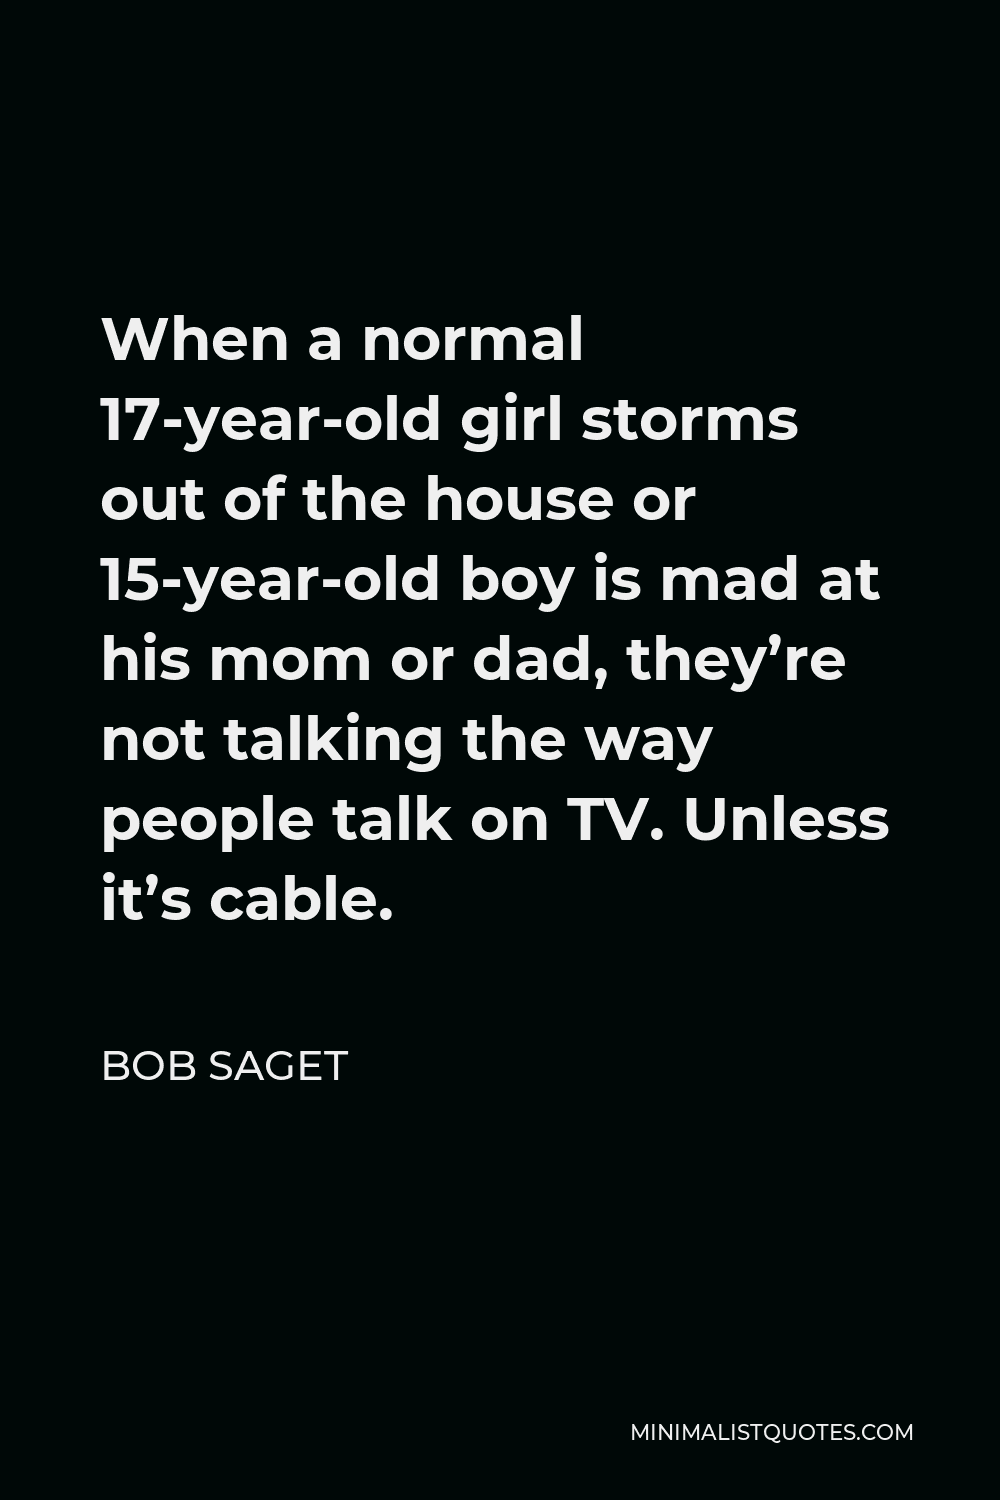 Bob Saget Quote - When a normal 17-year-old girl storms out of the house or 15-year-old boy is mad at his mom or dad, they’re not talking the way people talk on TV. Unless it’s cable.